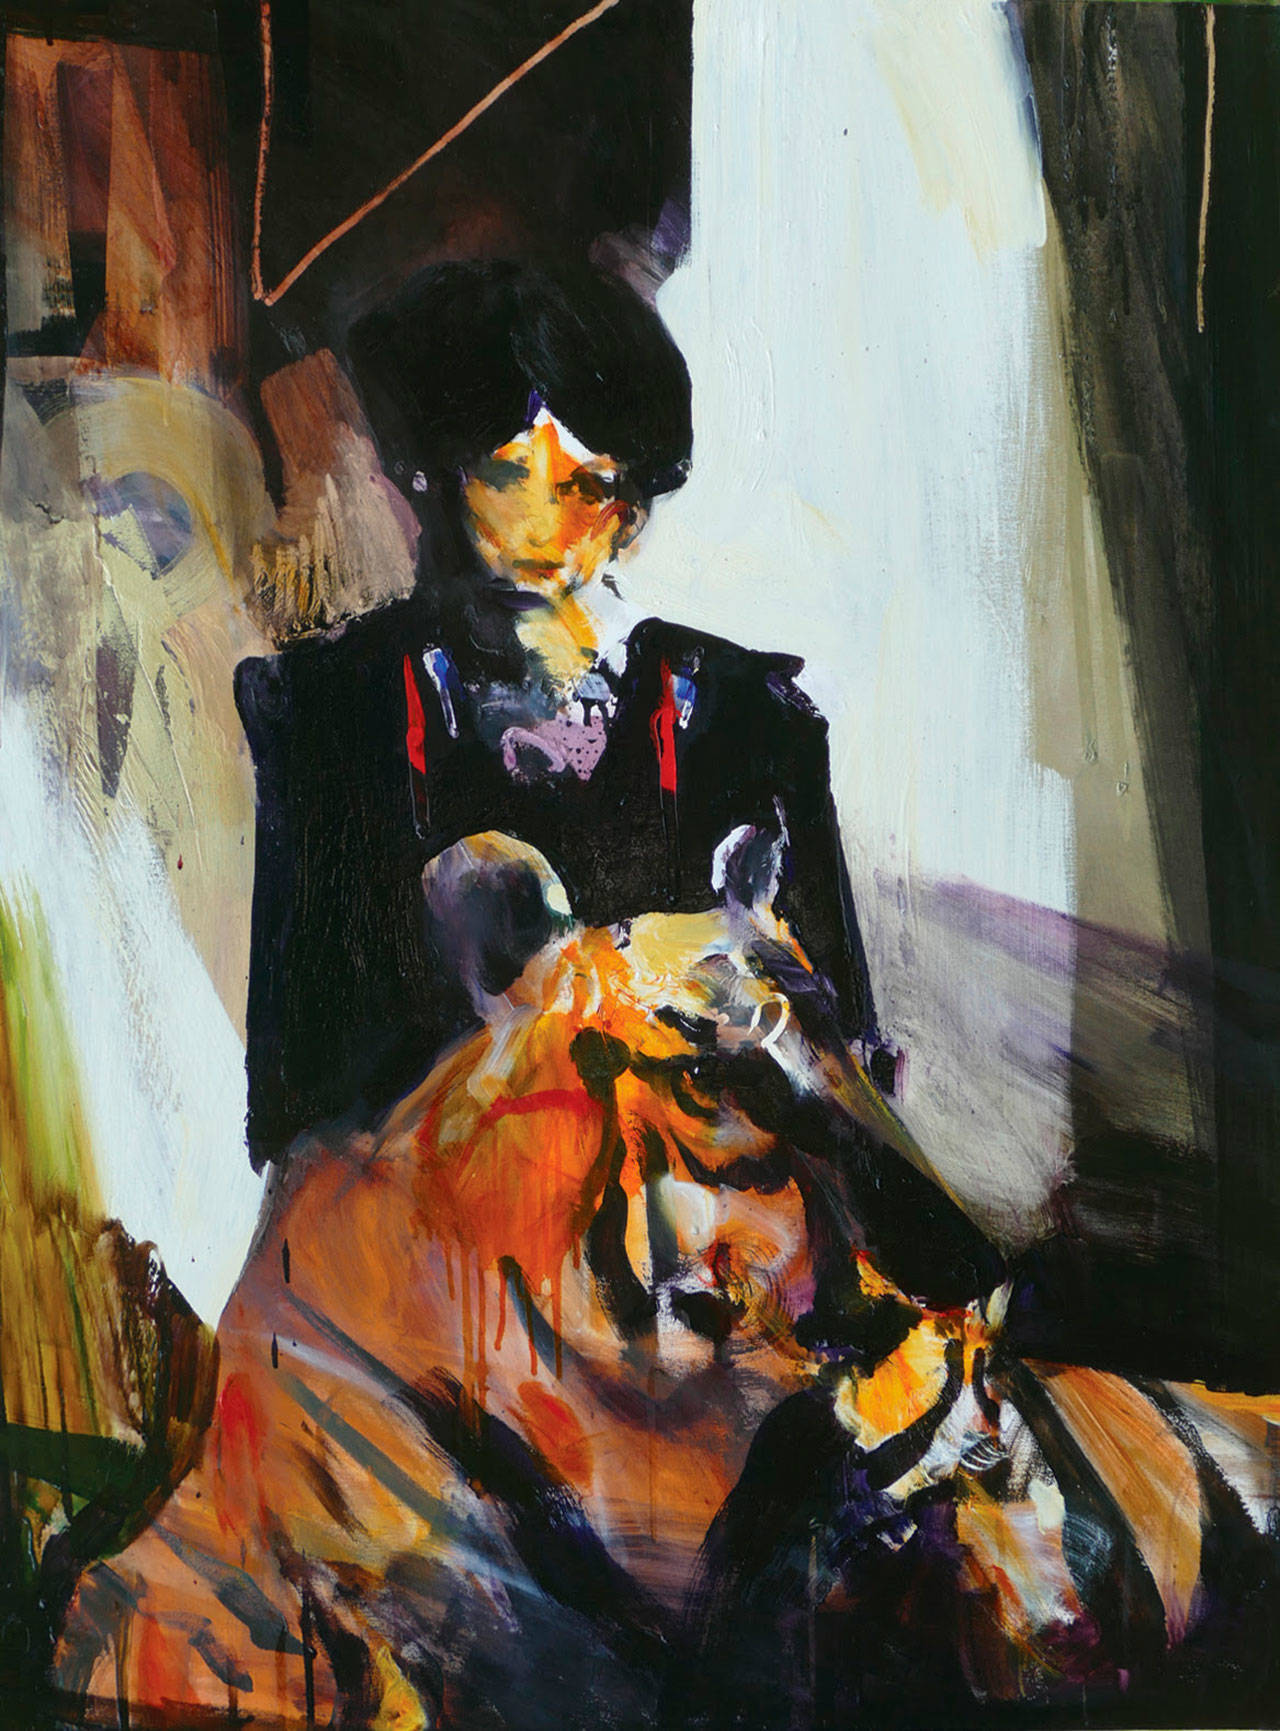 Image courtesy of Roby King Gallery | Adam Grosowsky                                “Lady and the Tiger” (40x30, oil on canvas) by Adam Grosowsky.